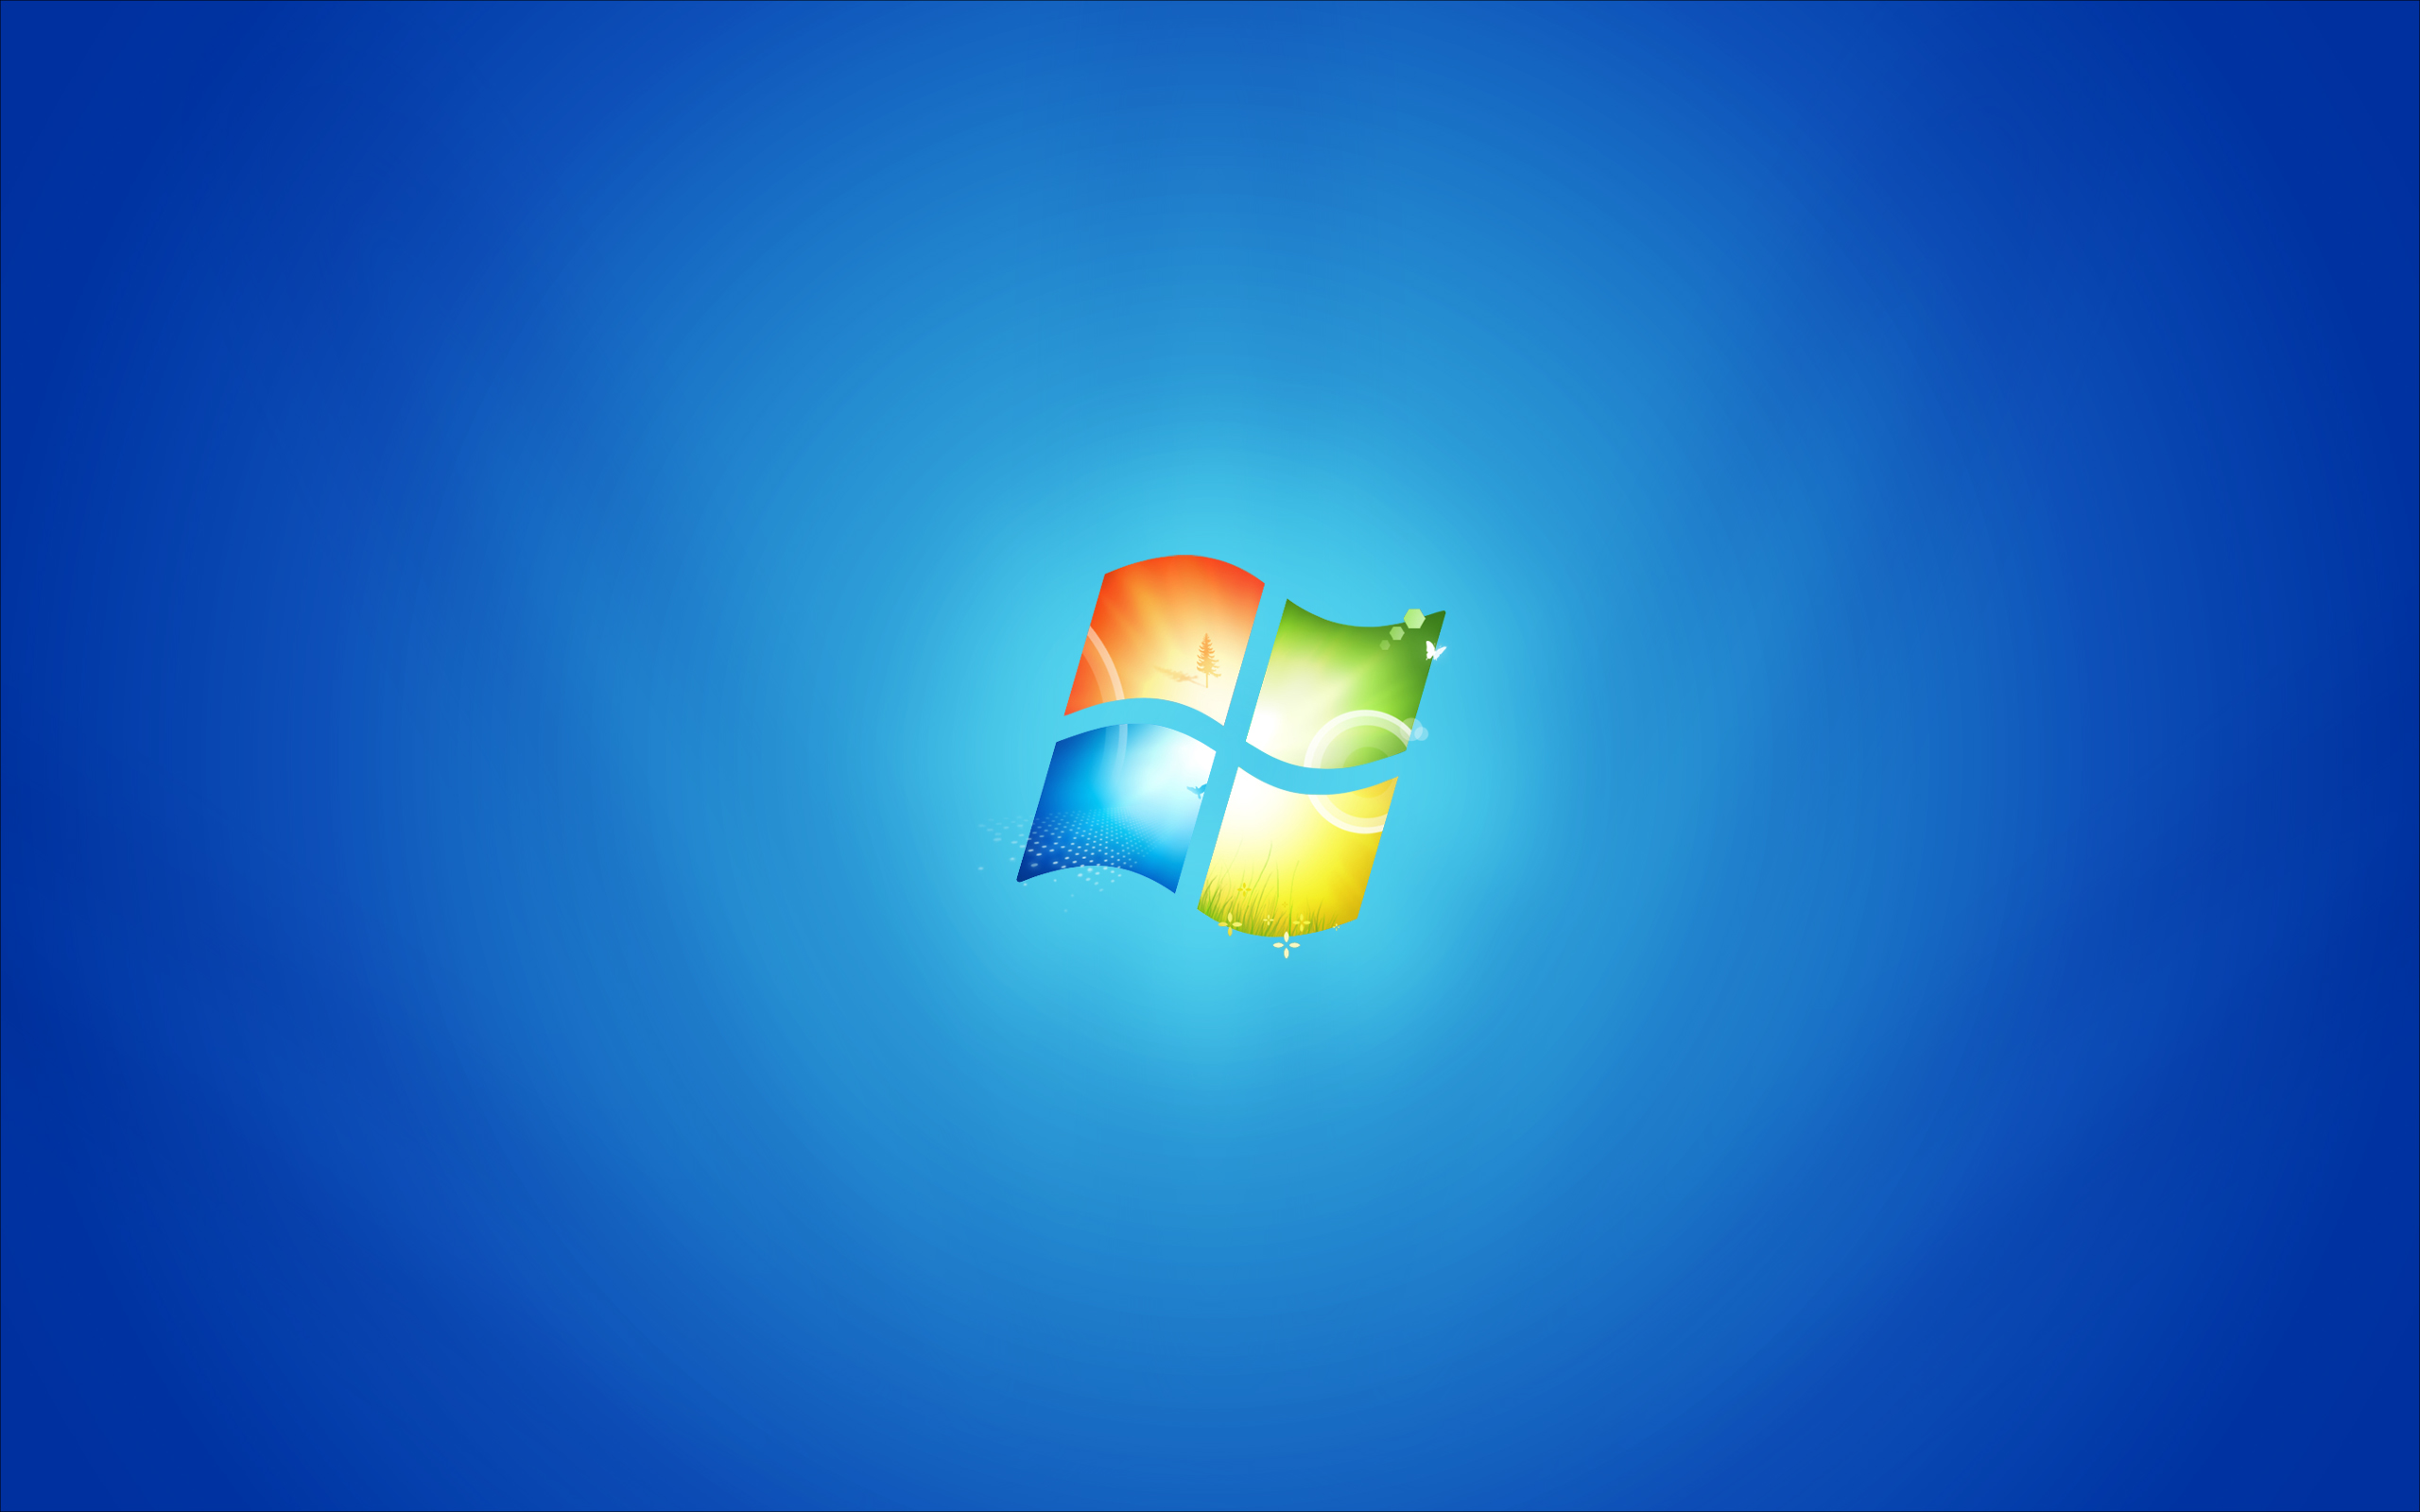 Personalized Wallpaper in Windows 10 on